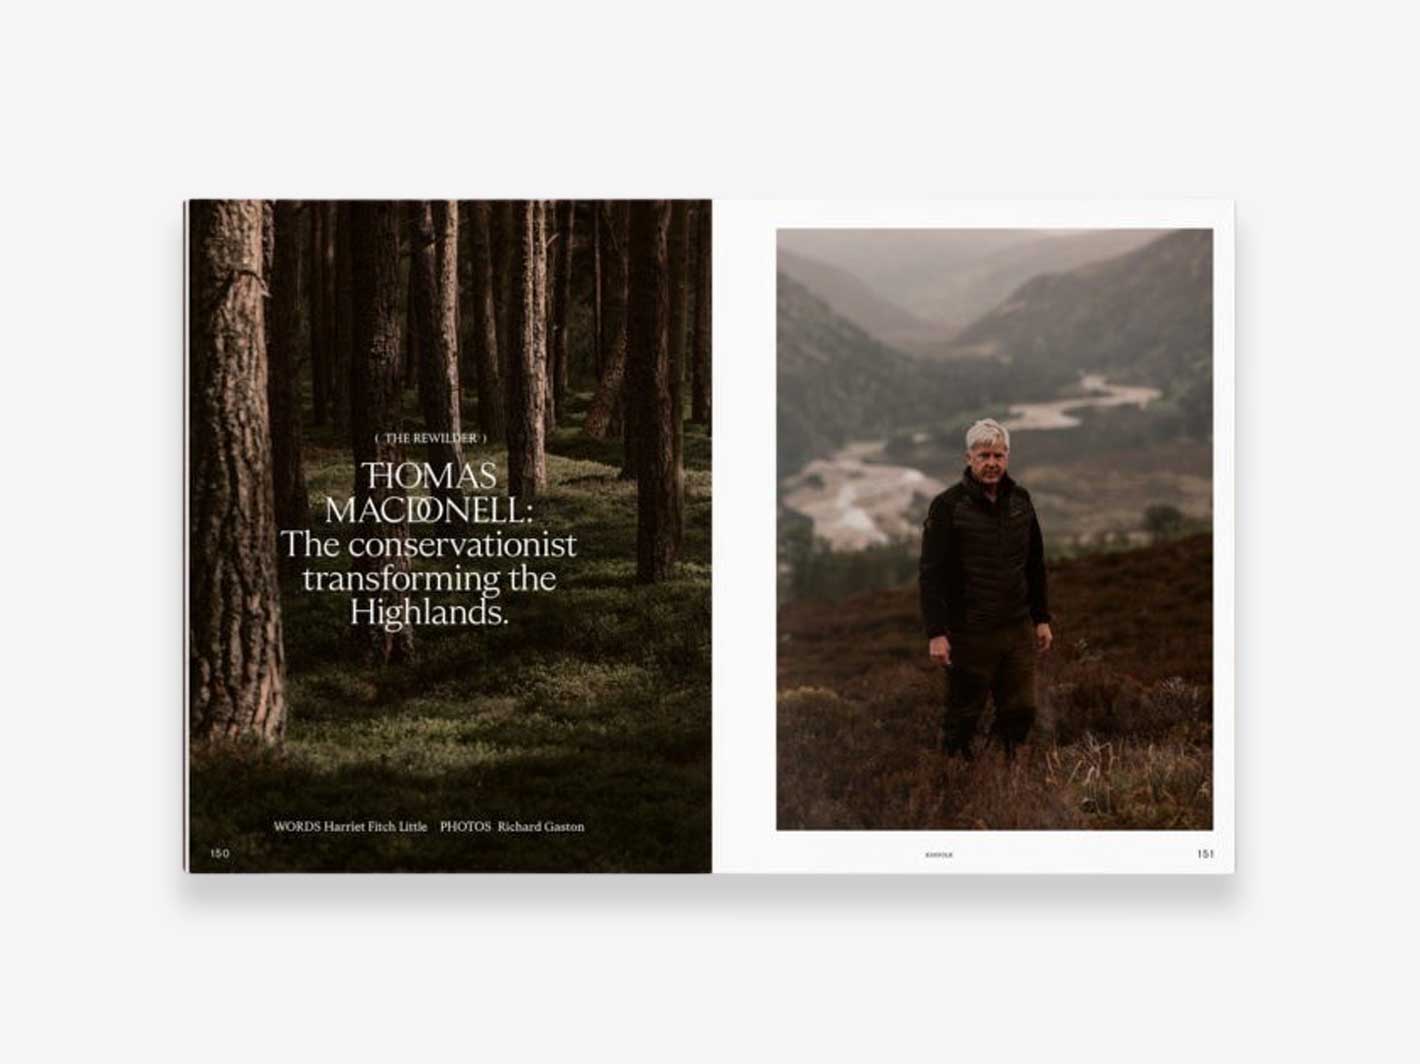 Kinfolk no 45 The Great Outdoors